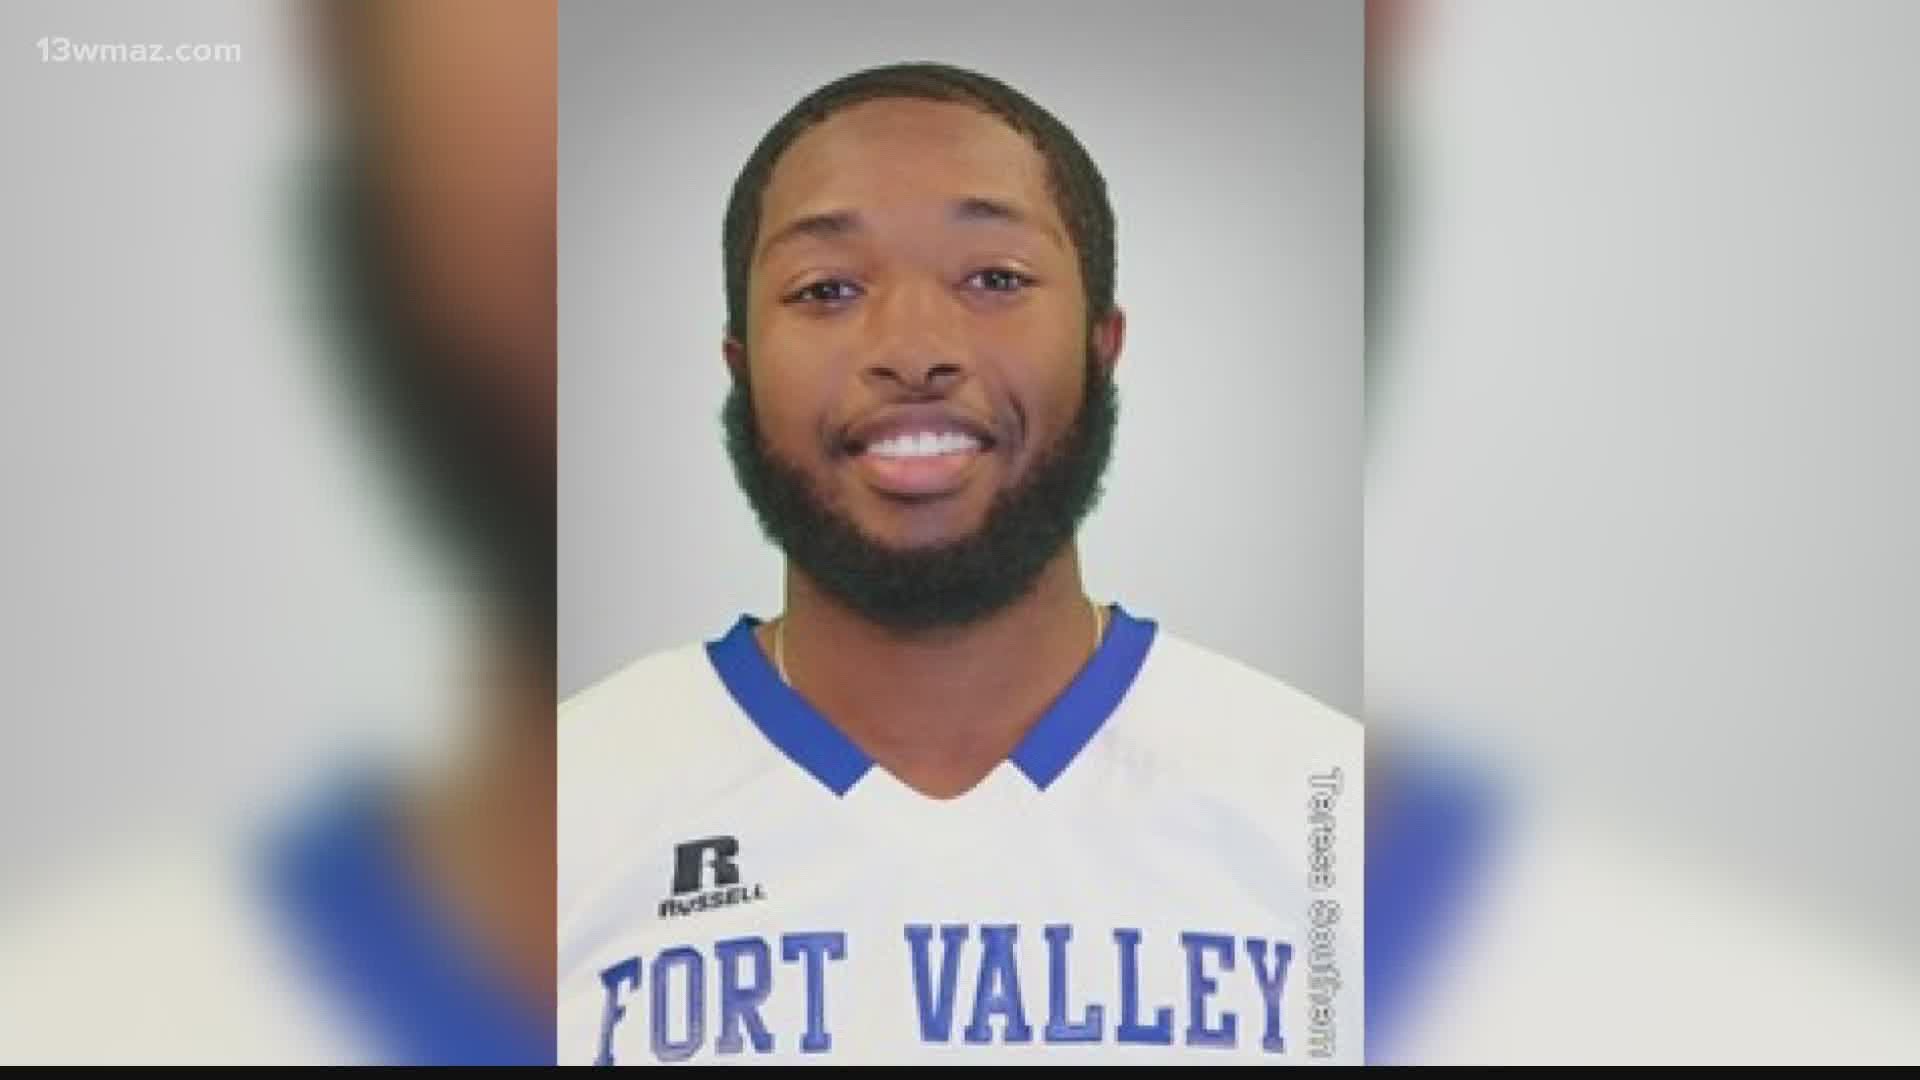 The Fort Valley State University family is mourning the passing of Trahmad Wiggins, an FVSU alumni and graduate student in the MS Biotechnology program.